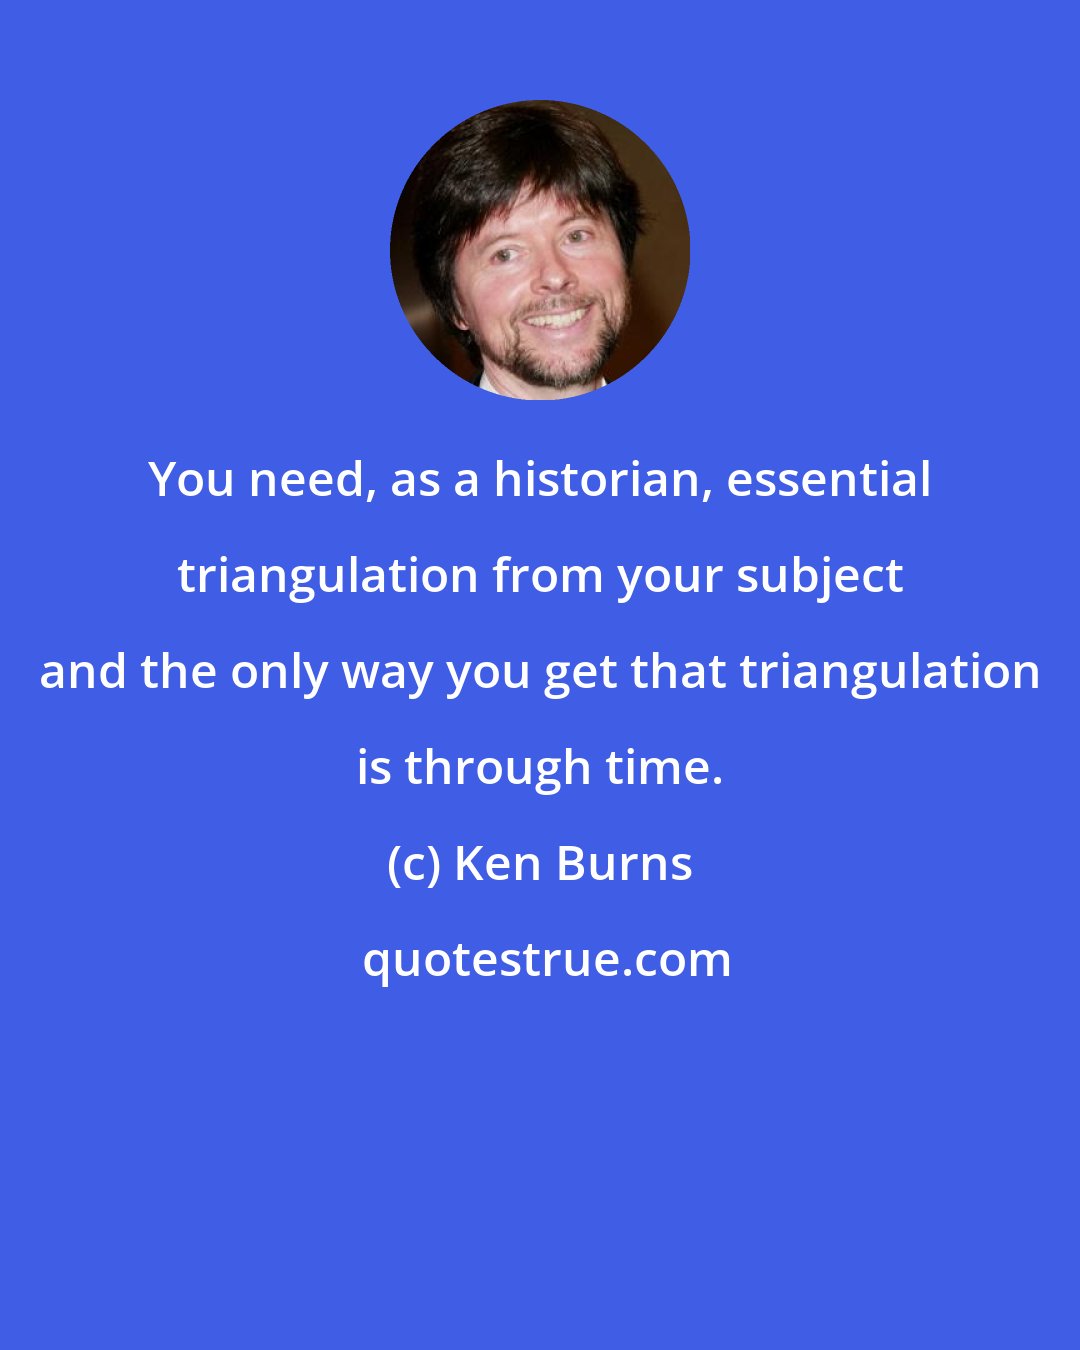 Ken Burns: You need, as a historian, essential triangulation from your subject and the only way you get that triangulation is through time.